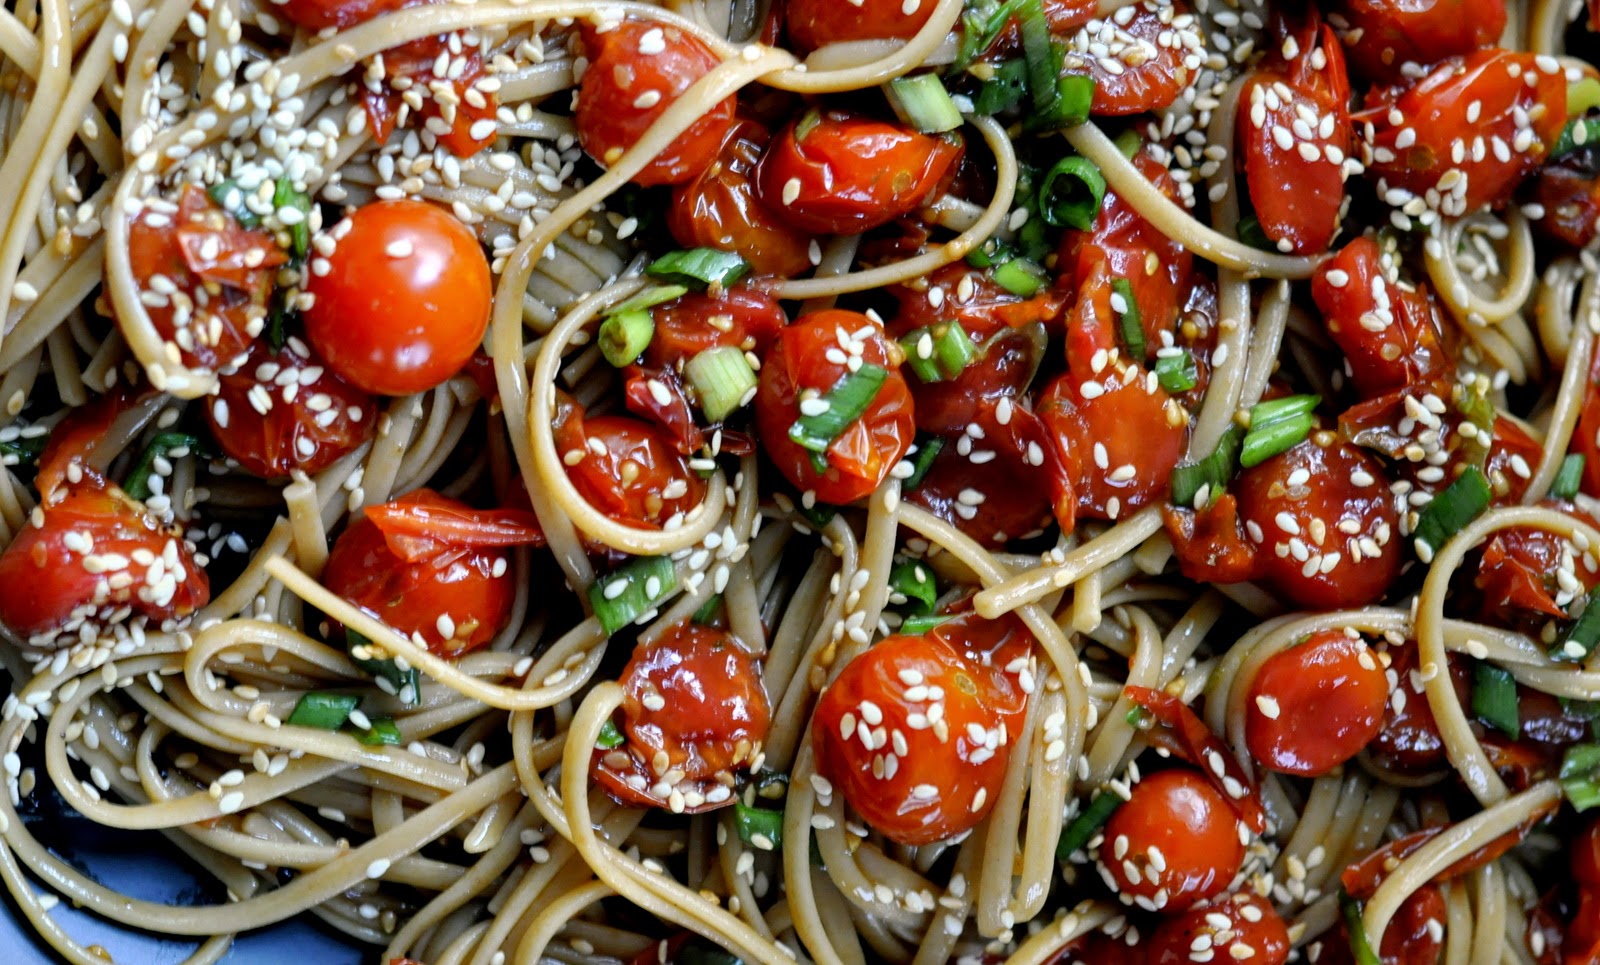 Whole Wheat Linguine with Roasted Tomatoes and Asian-Inspired Vinaigrette | Taste As You Go